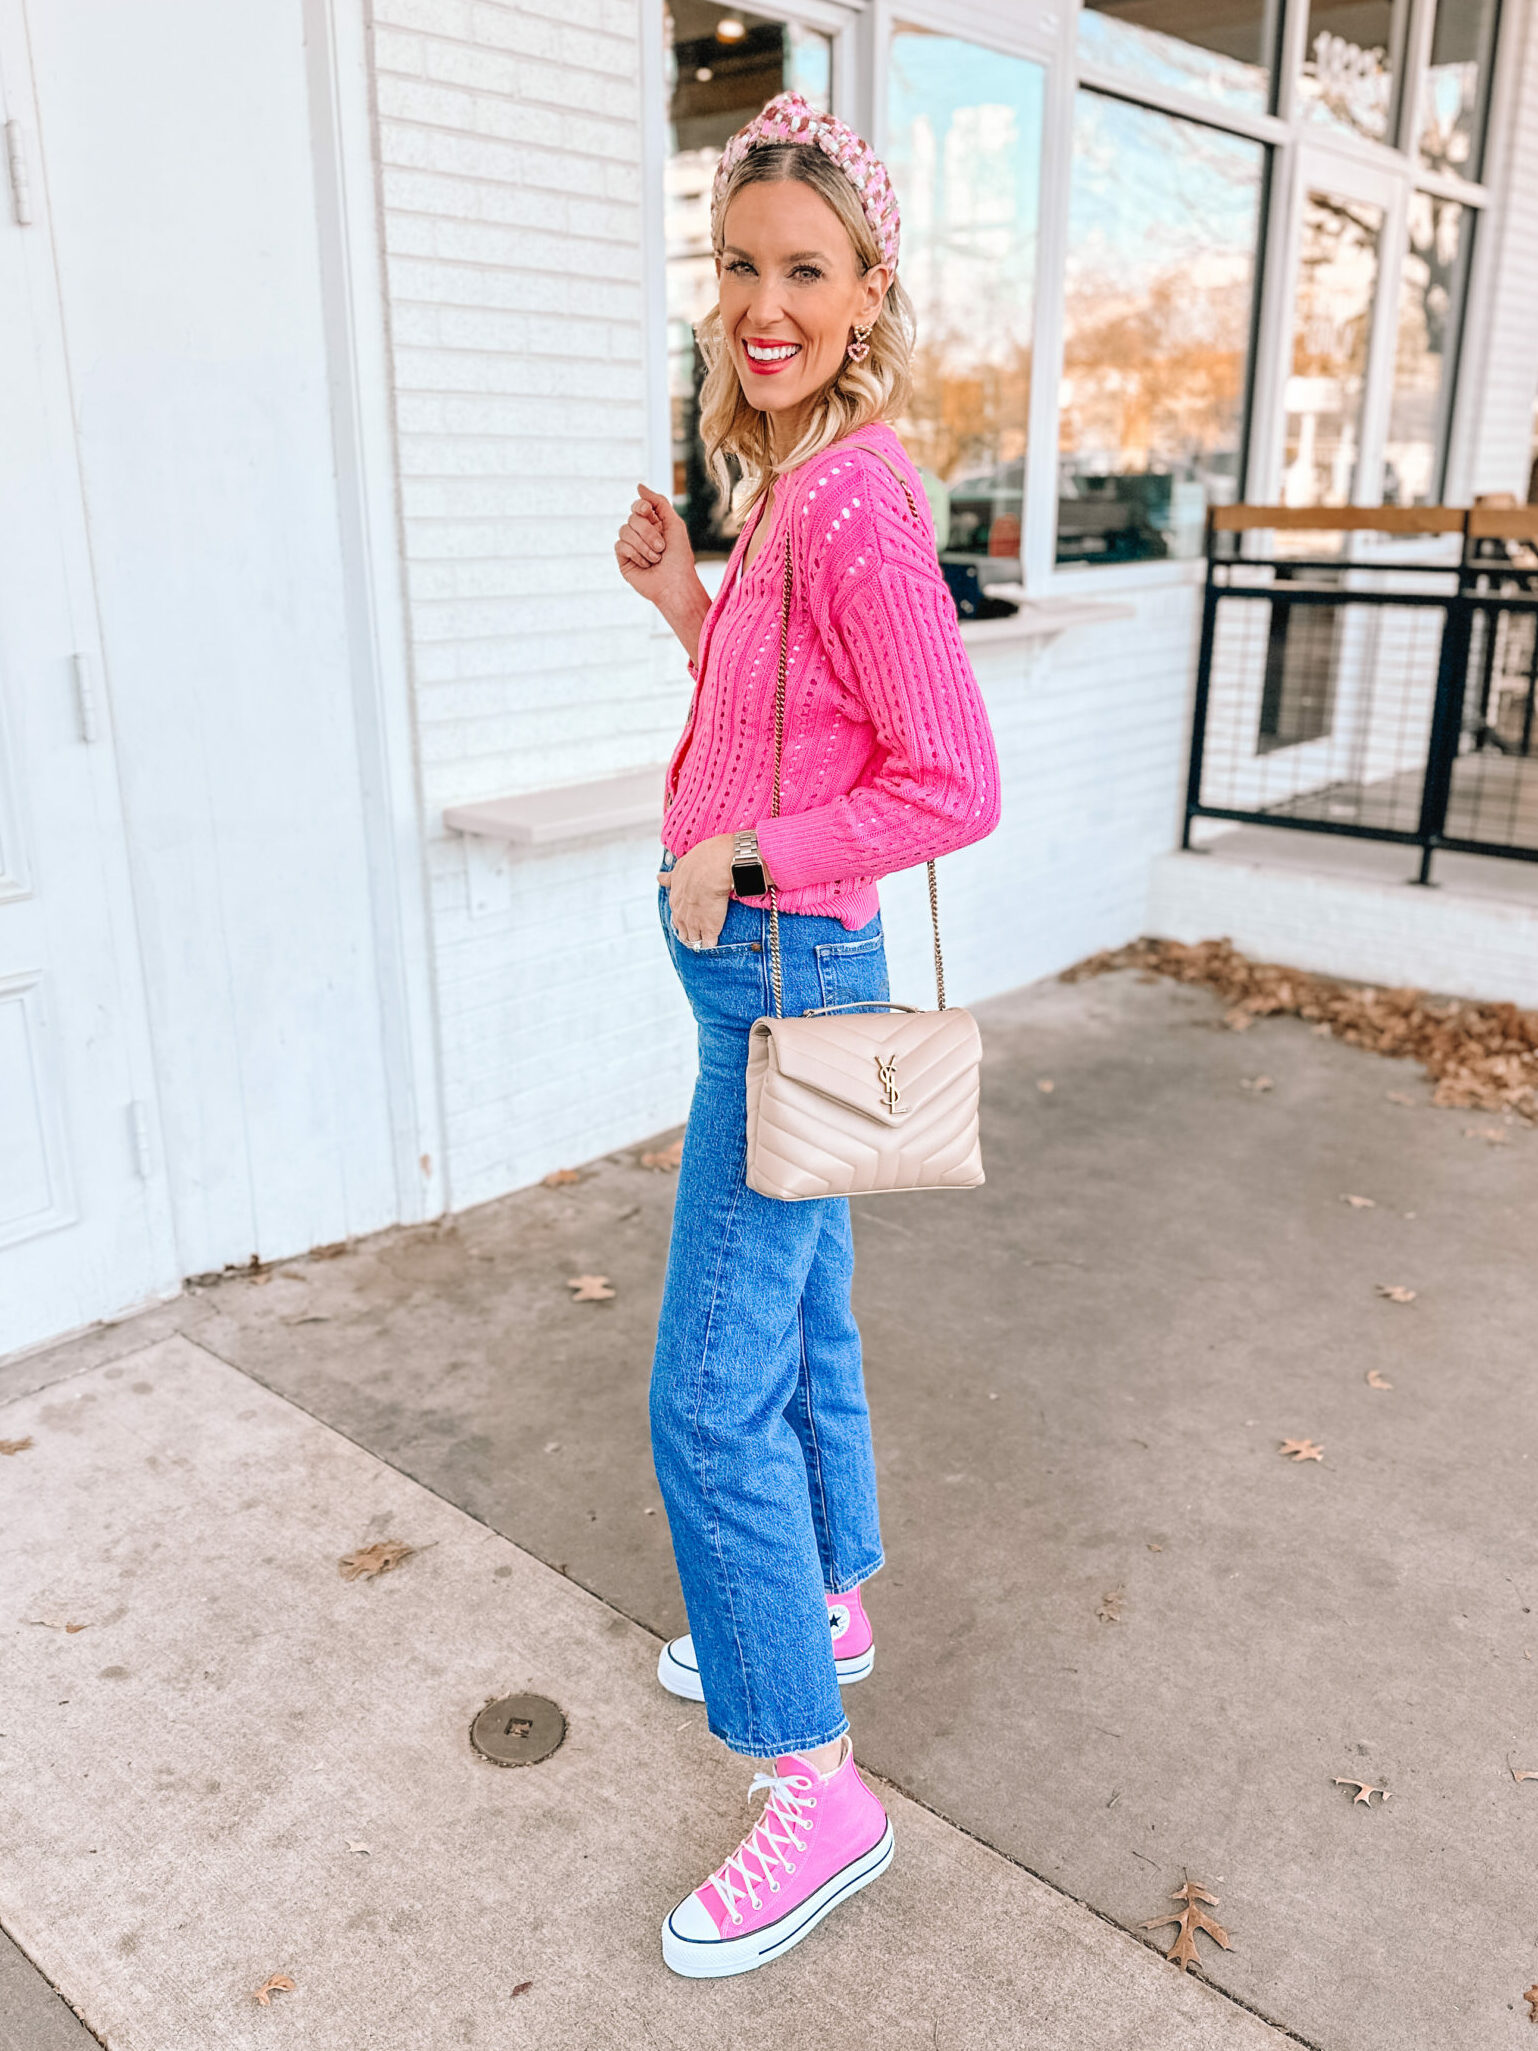 How adorable is this $17 Walmart cardigan?! The bright pink is so fun and perfect to pair with other fun accessories for a Valentine's Day vibe!